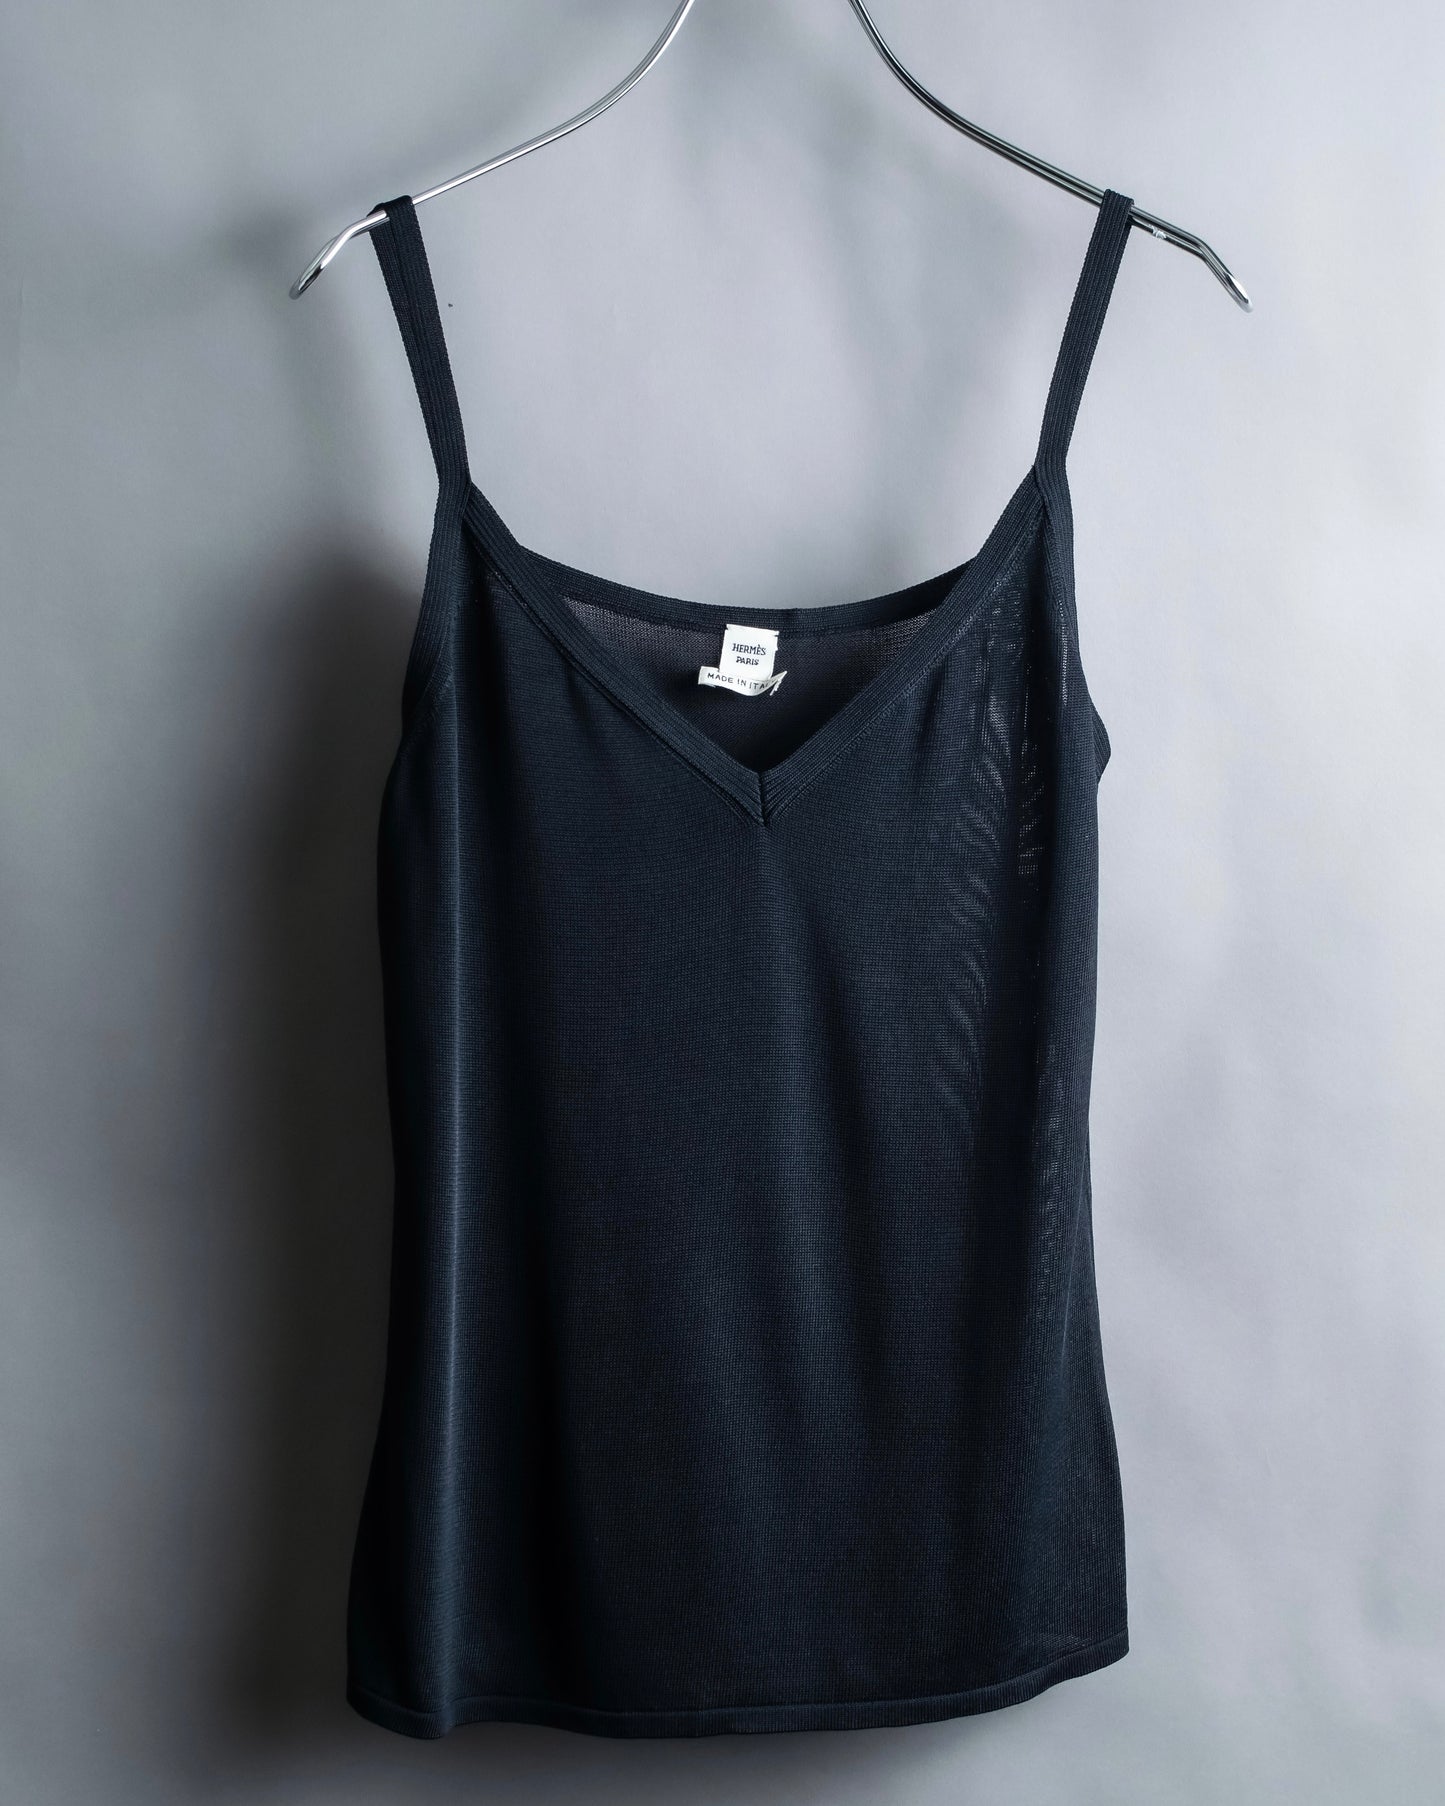 "HERMES" Sheer rayon mode style camisole